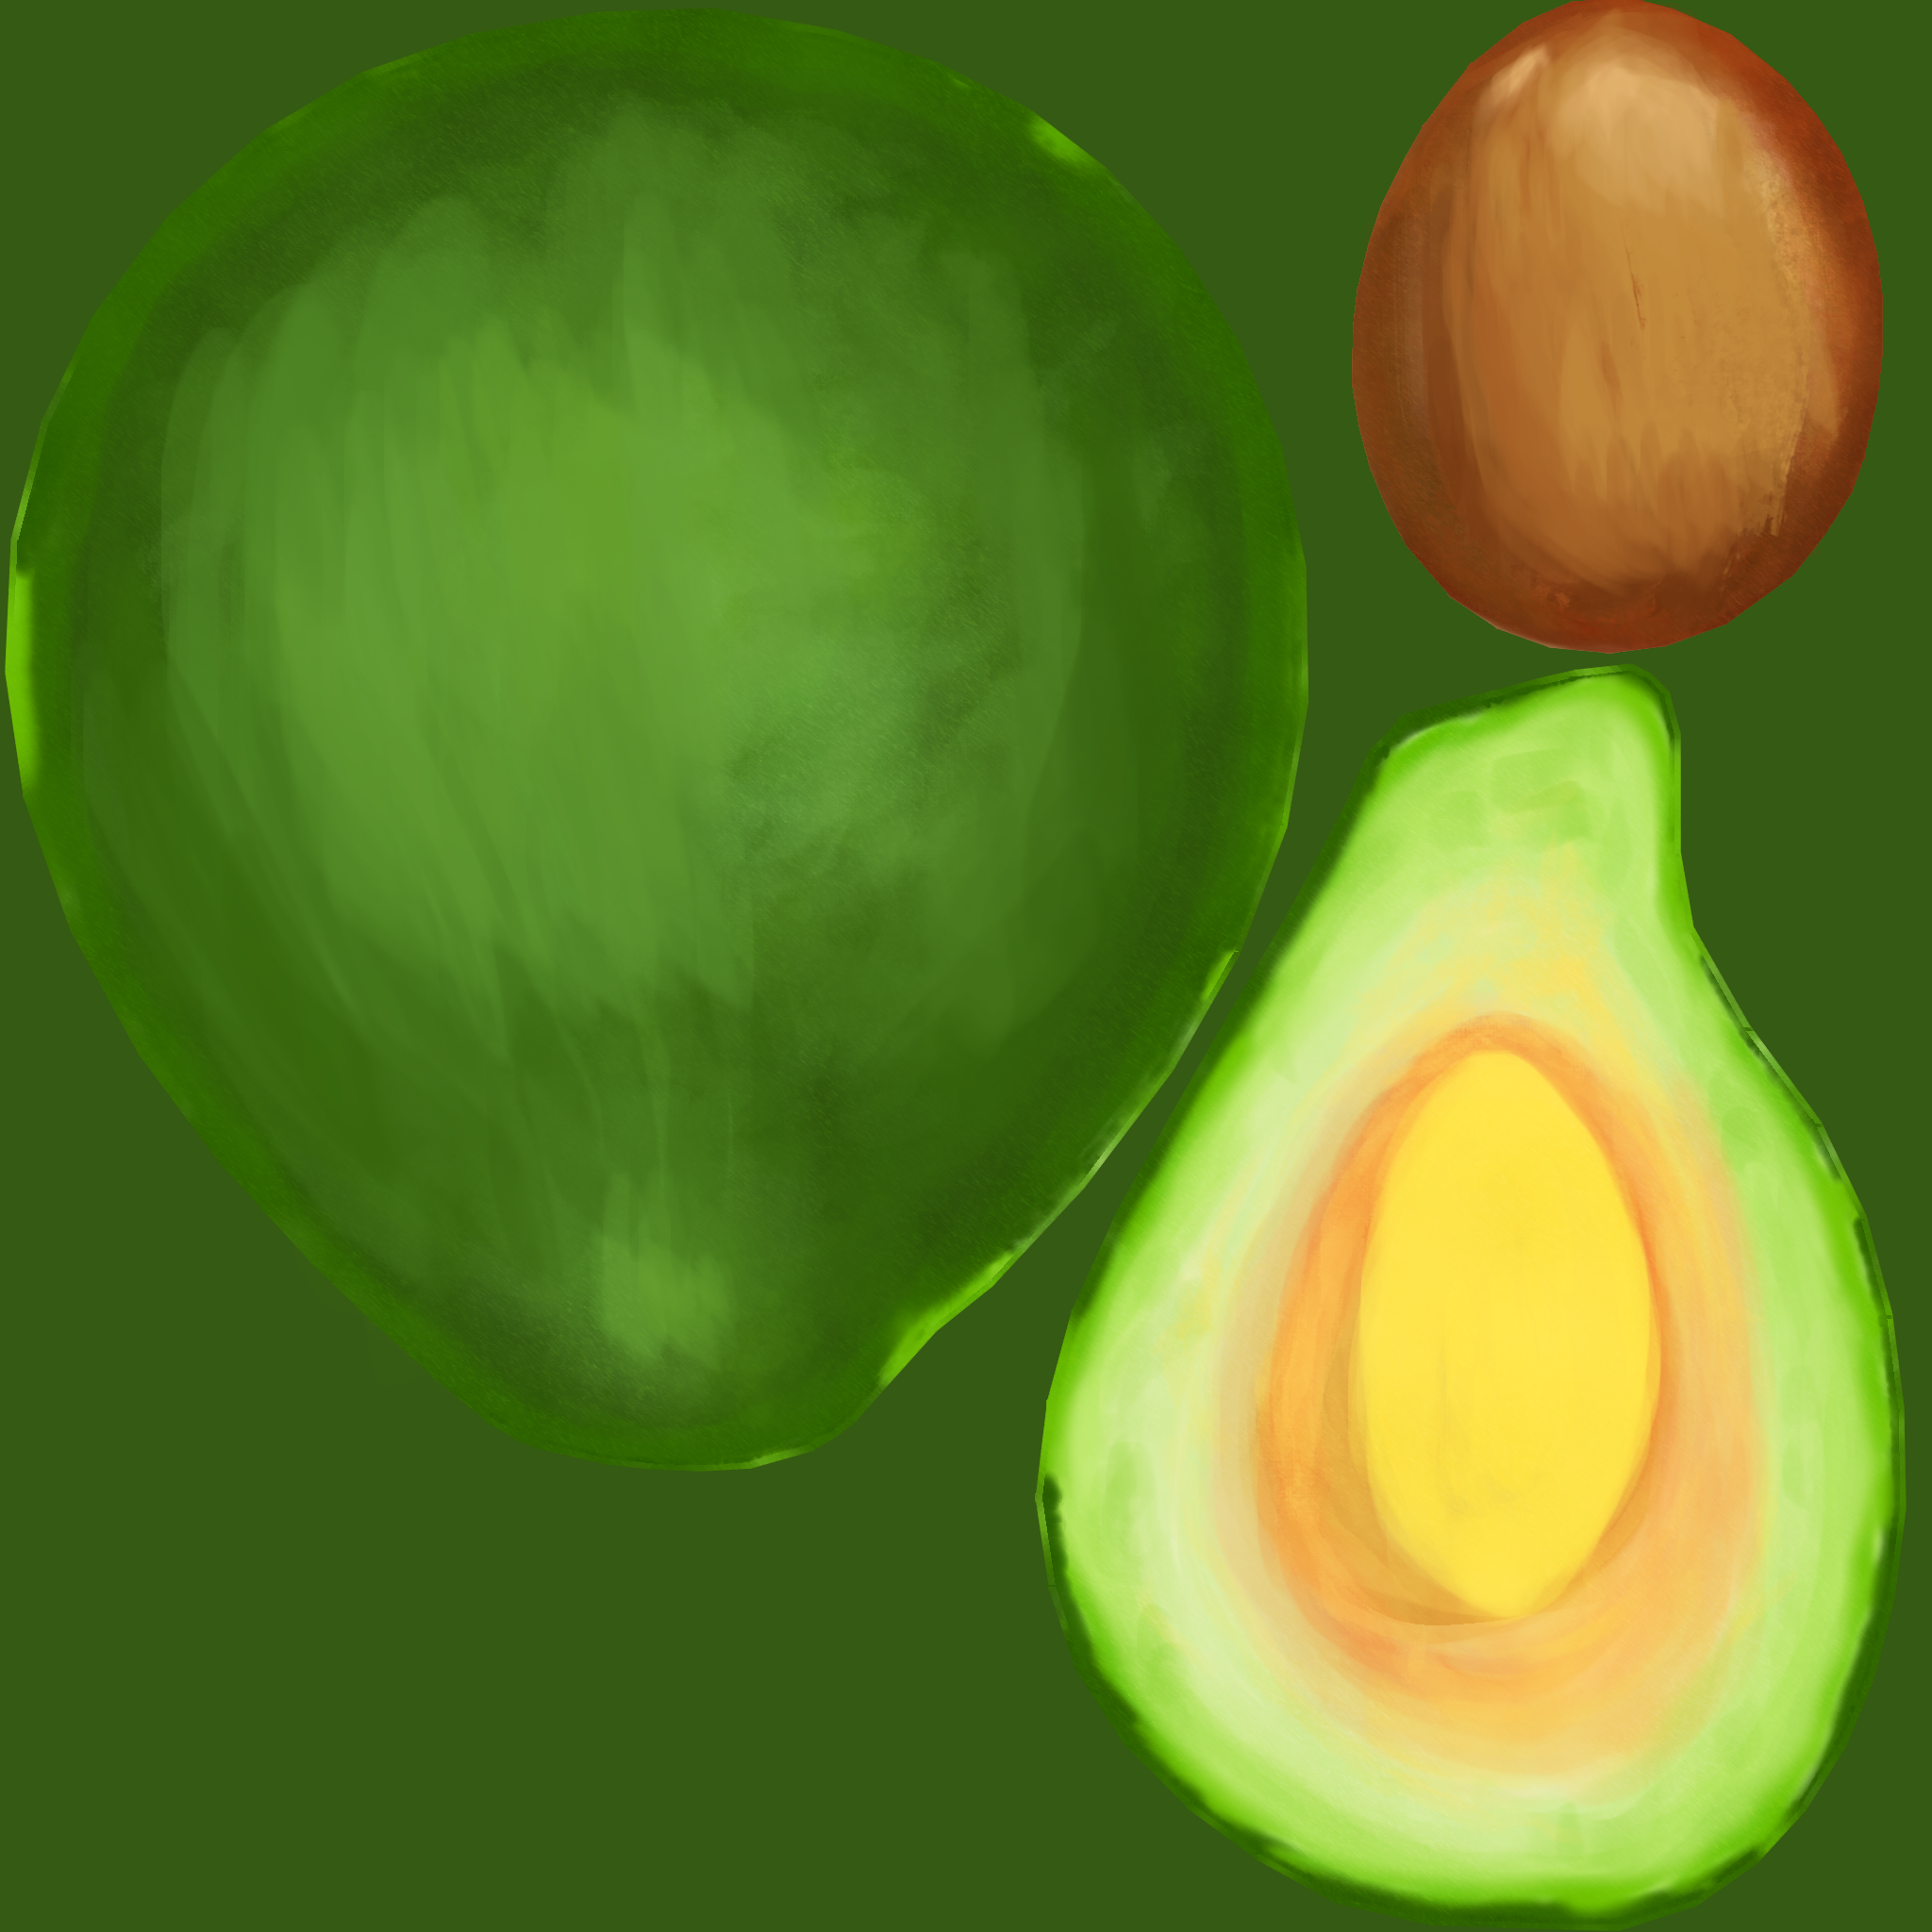 automated-tests/resources/Avocado_baseColor.png